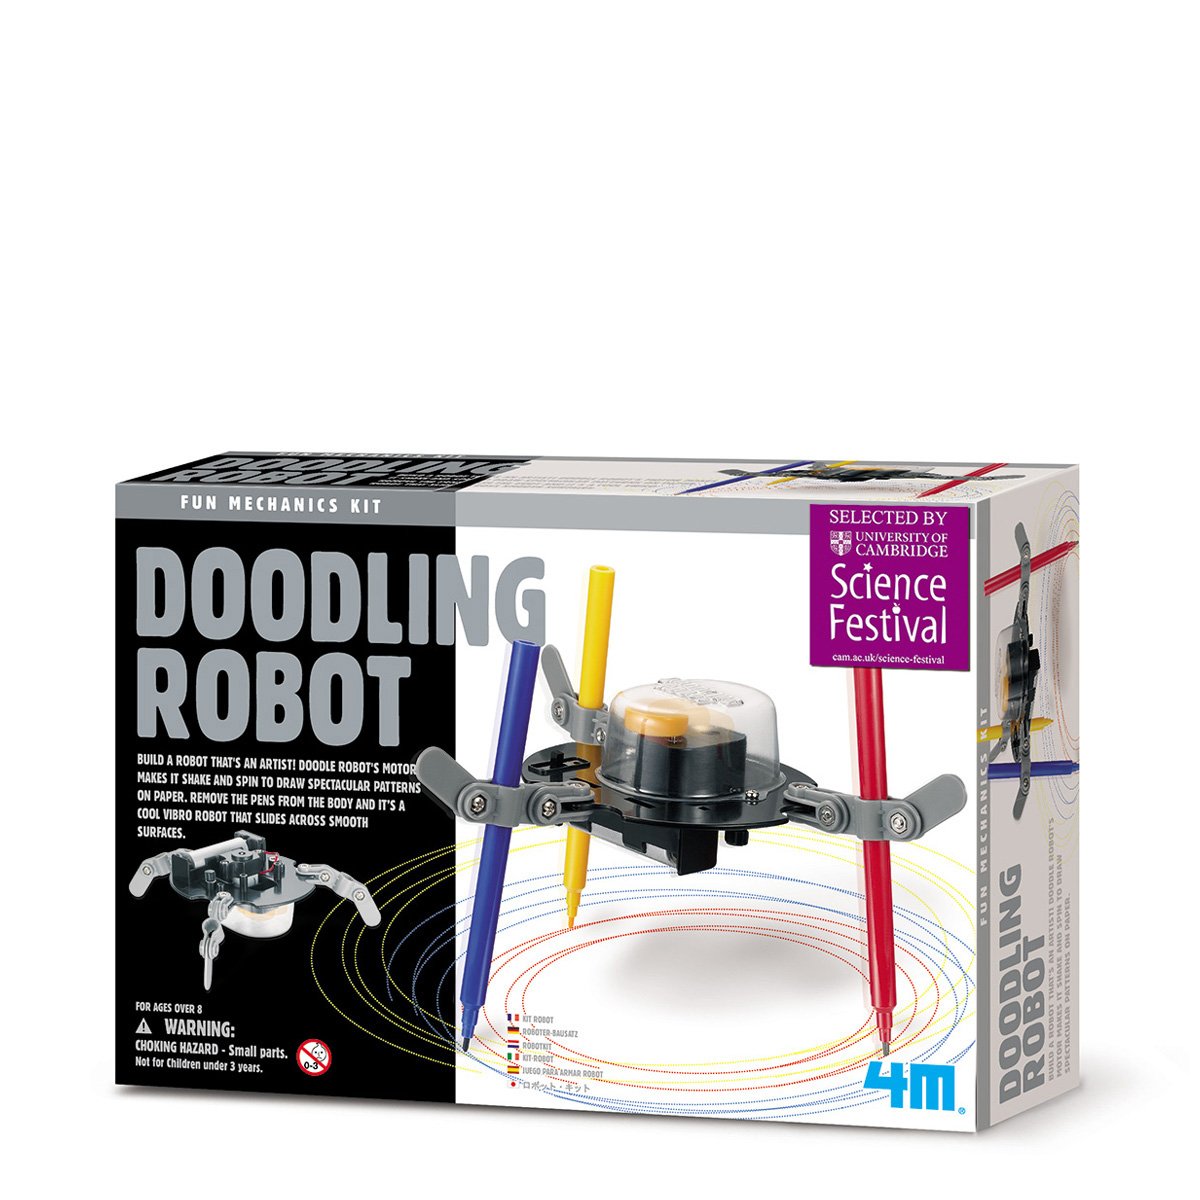 Great Gizmo Doodling Robot